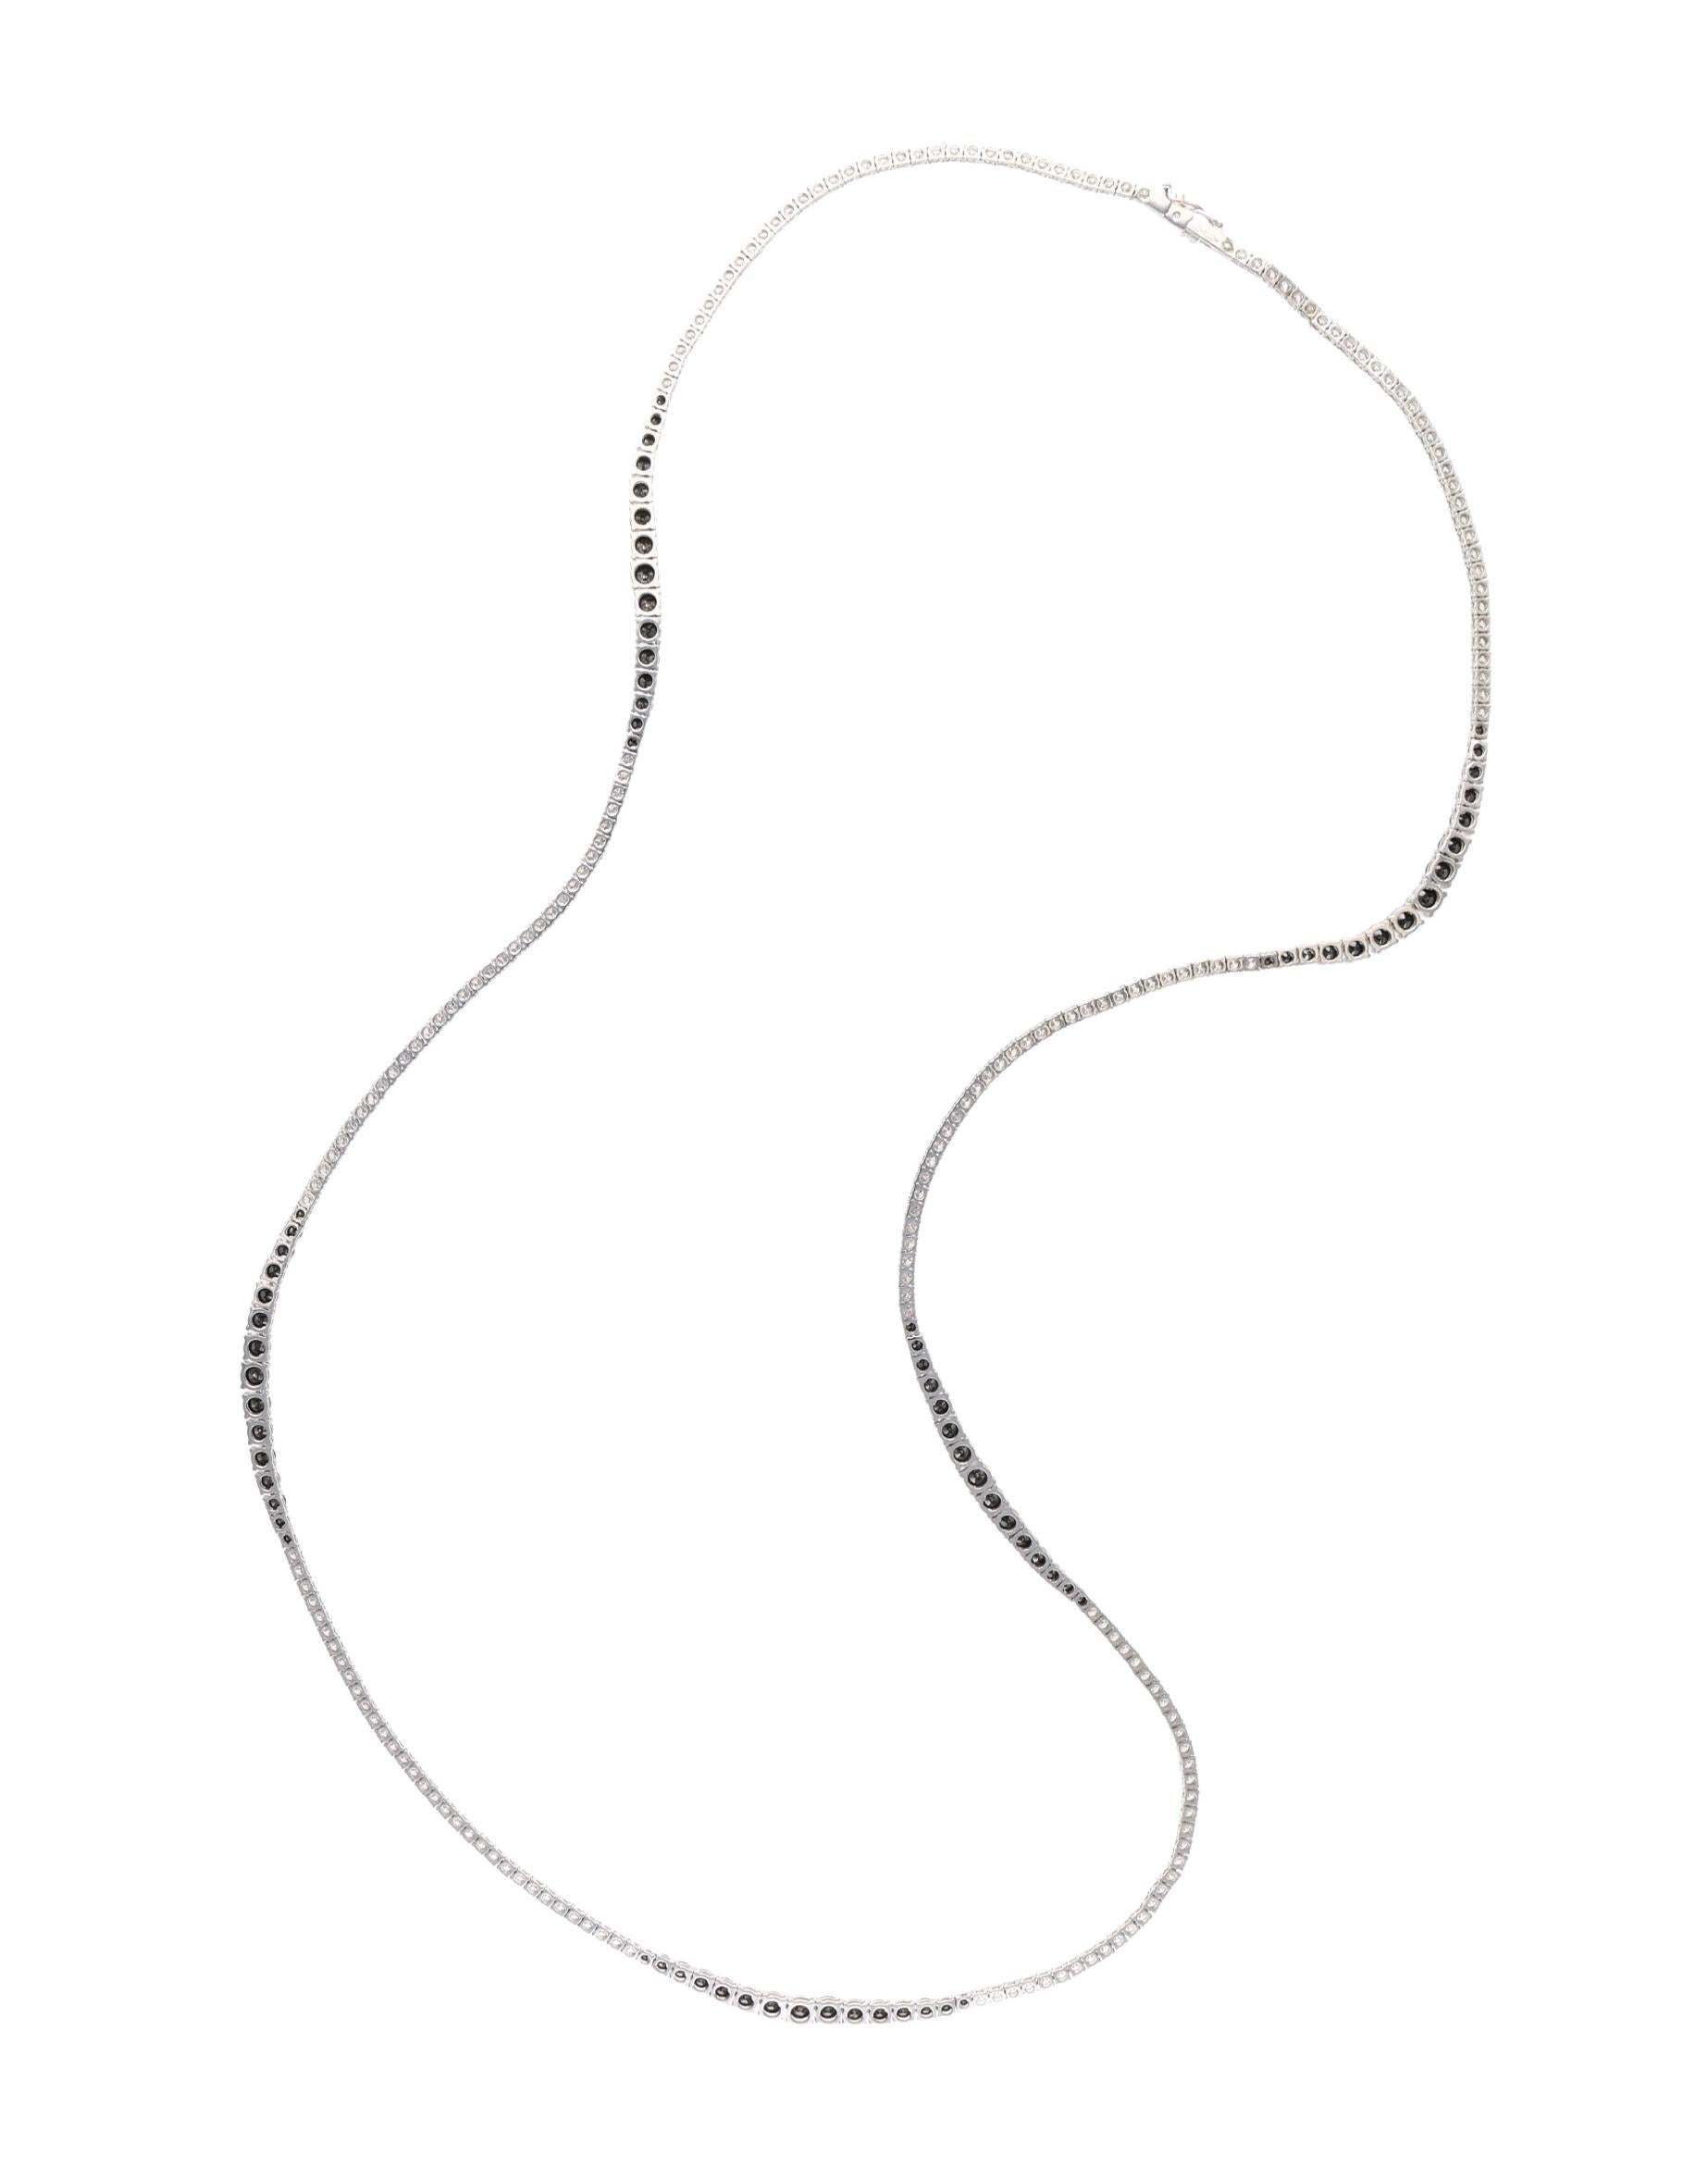 A simple yet stunning necklace composed of round brilliant cut black and colorless diamonds.

- Diamonds weigh a total of approximately 16.00 carats
- Signed Leo Pizzo
- Italy
- 18 karat white gold
- Total weight 32.58 grams
- Length 30 inches

The